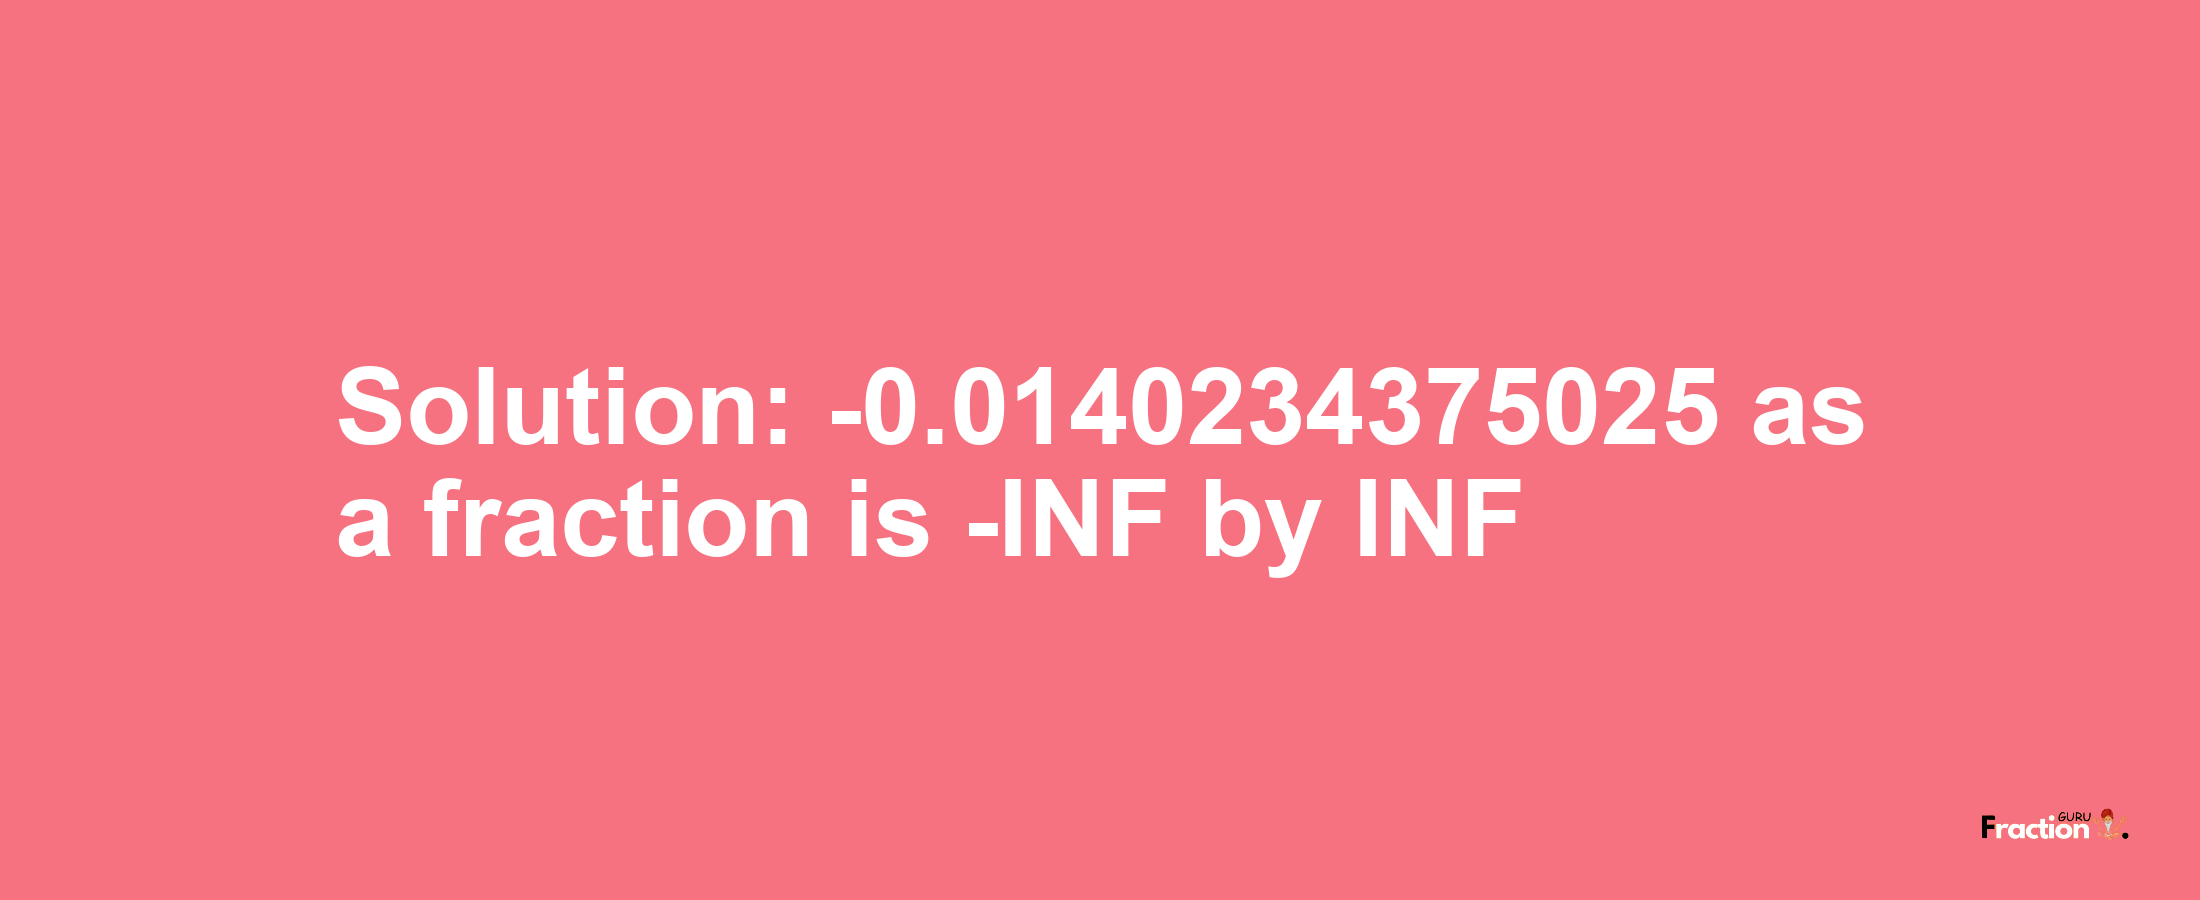 Solution:-0.0140234375025 as a fraction is -INF/INF